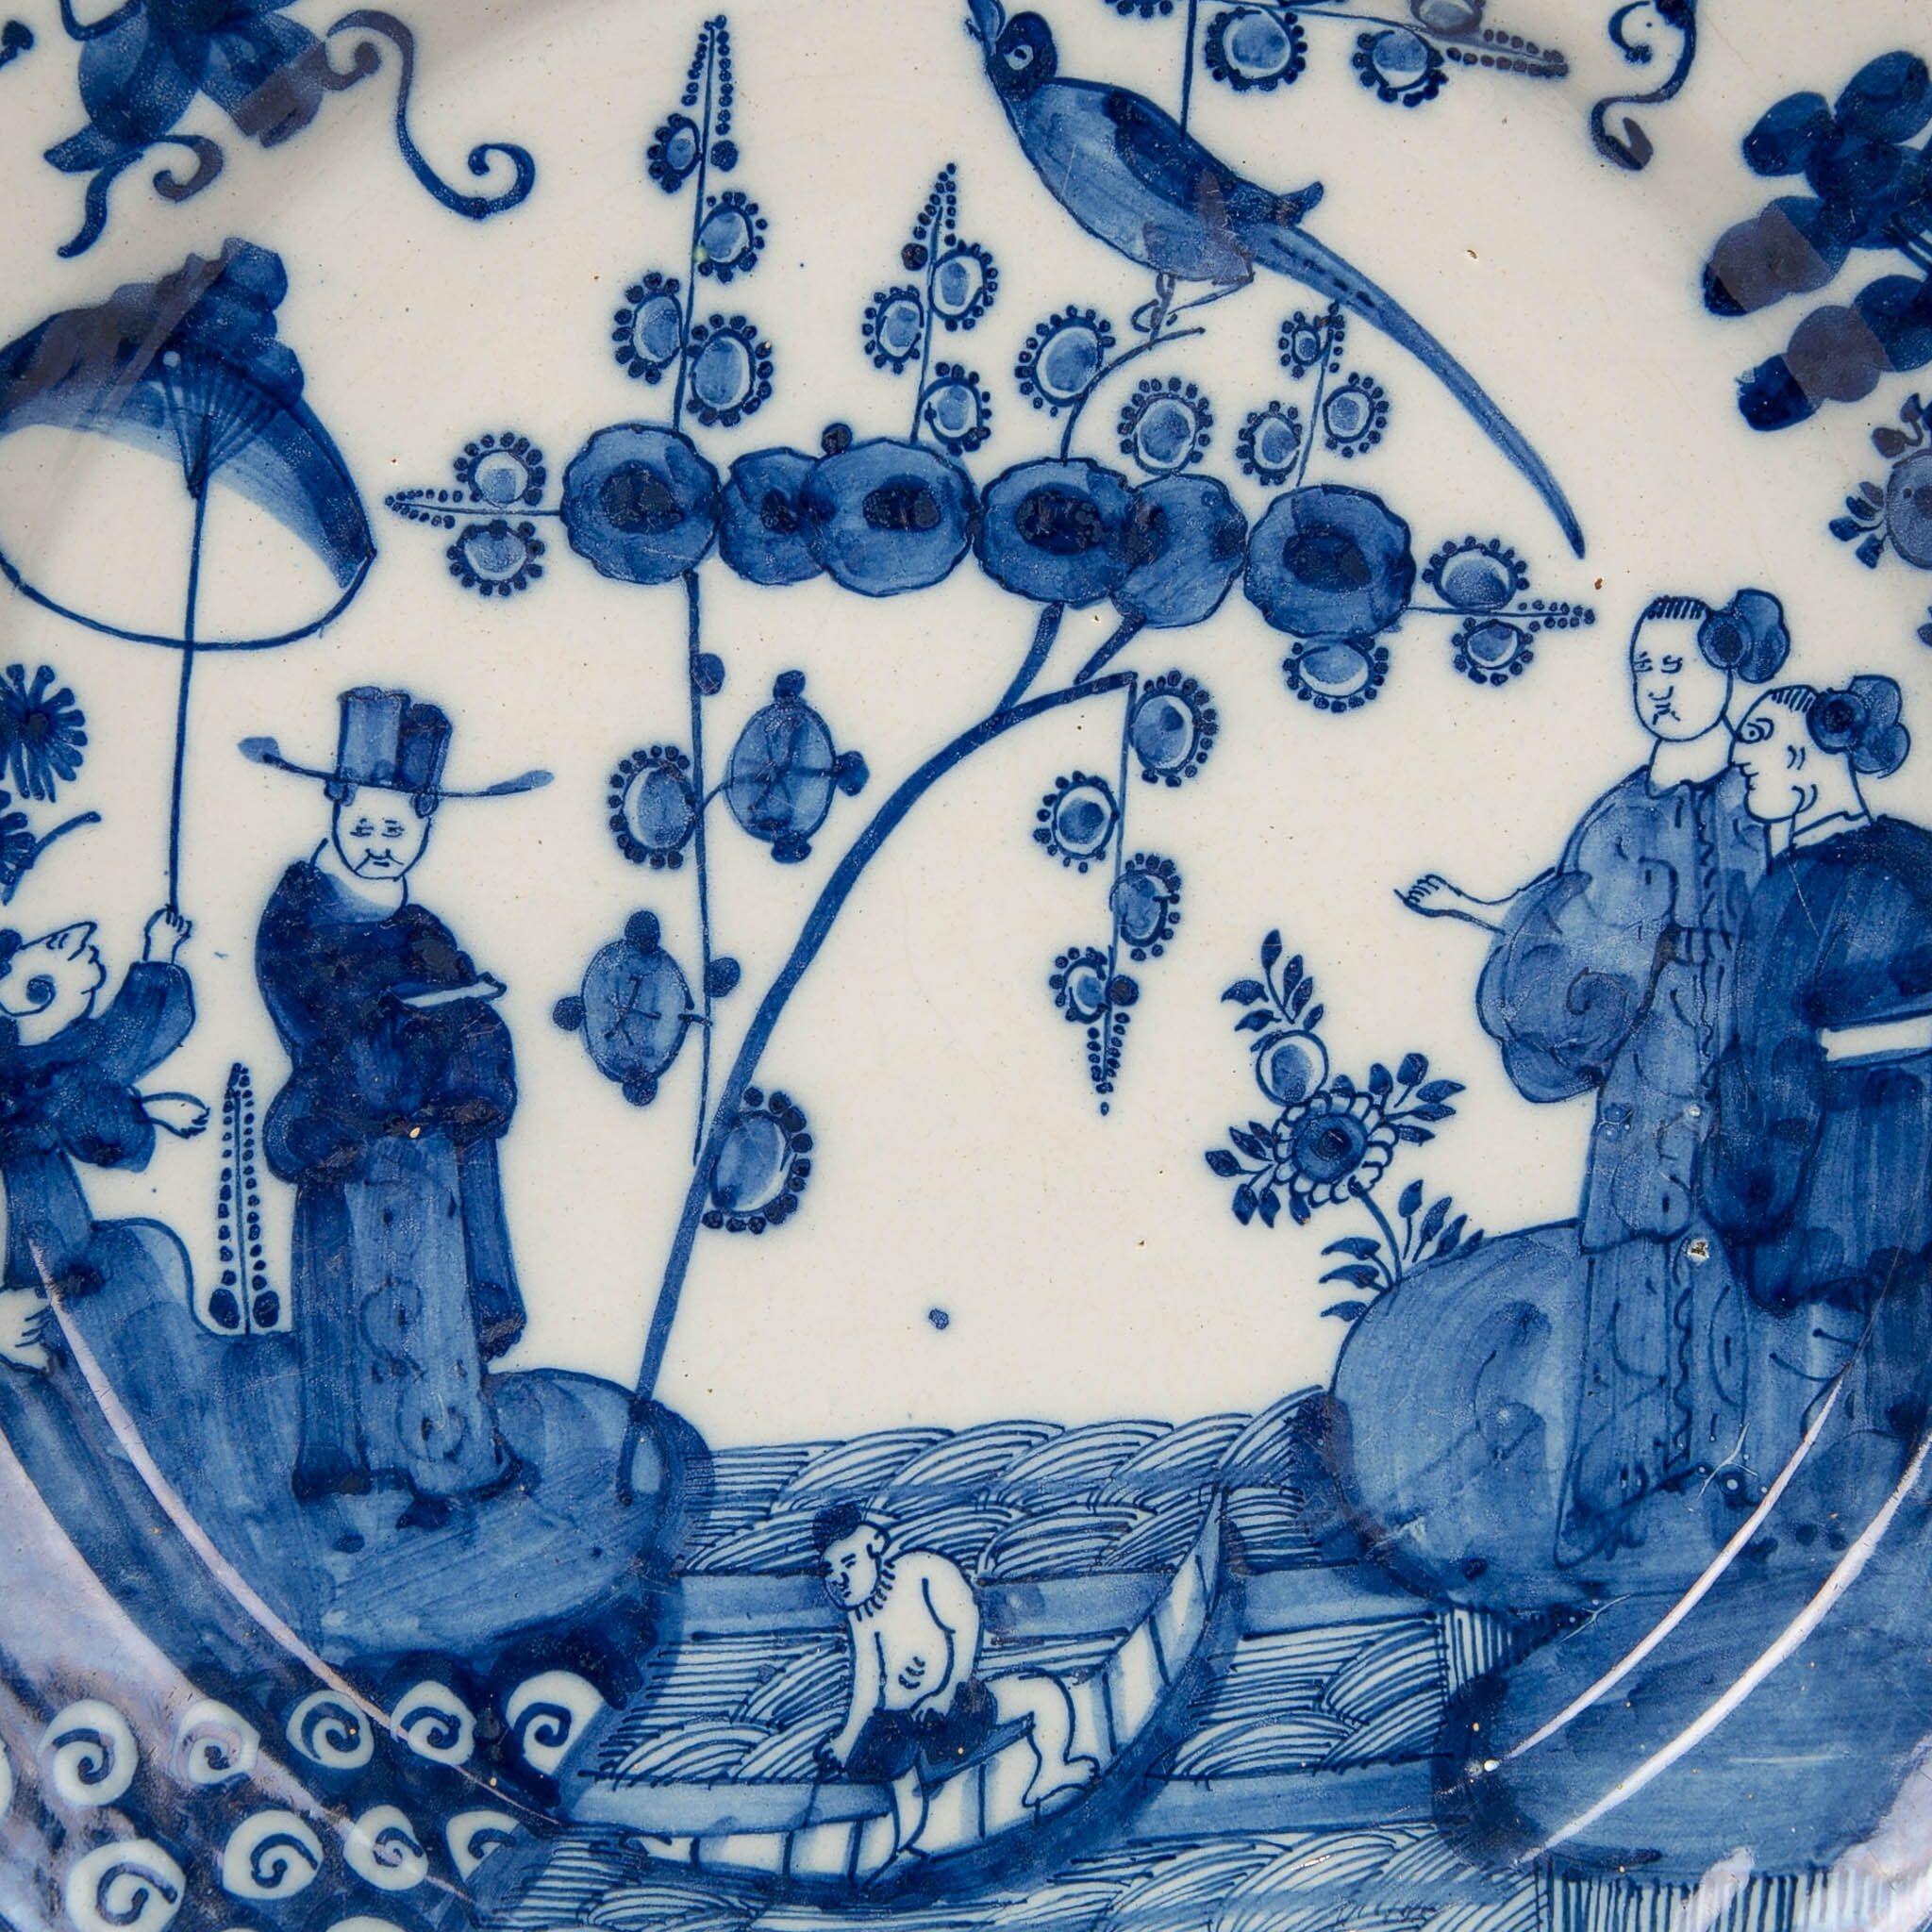 Glazed Pair of Antique Delft Chargers with Chinoiserie Scene, Netherlands circa 1693